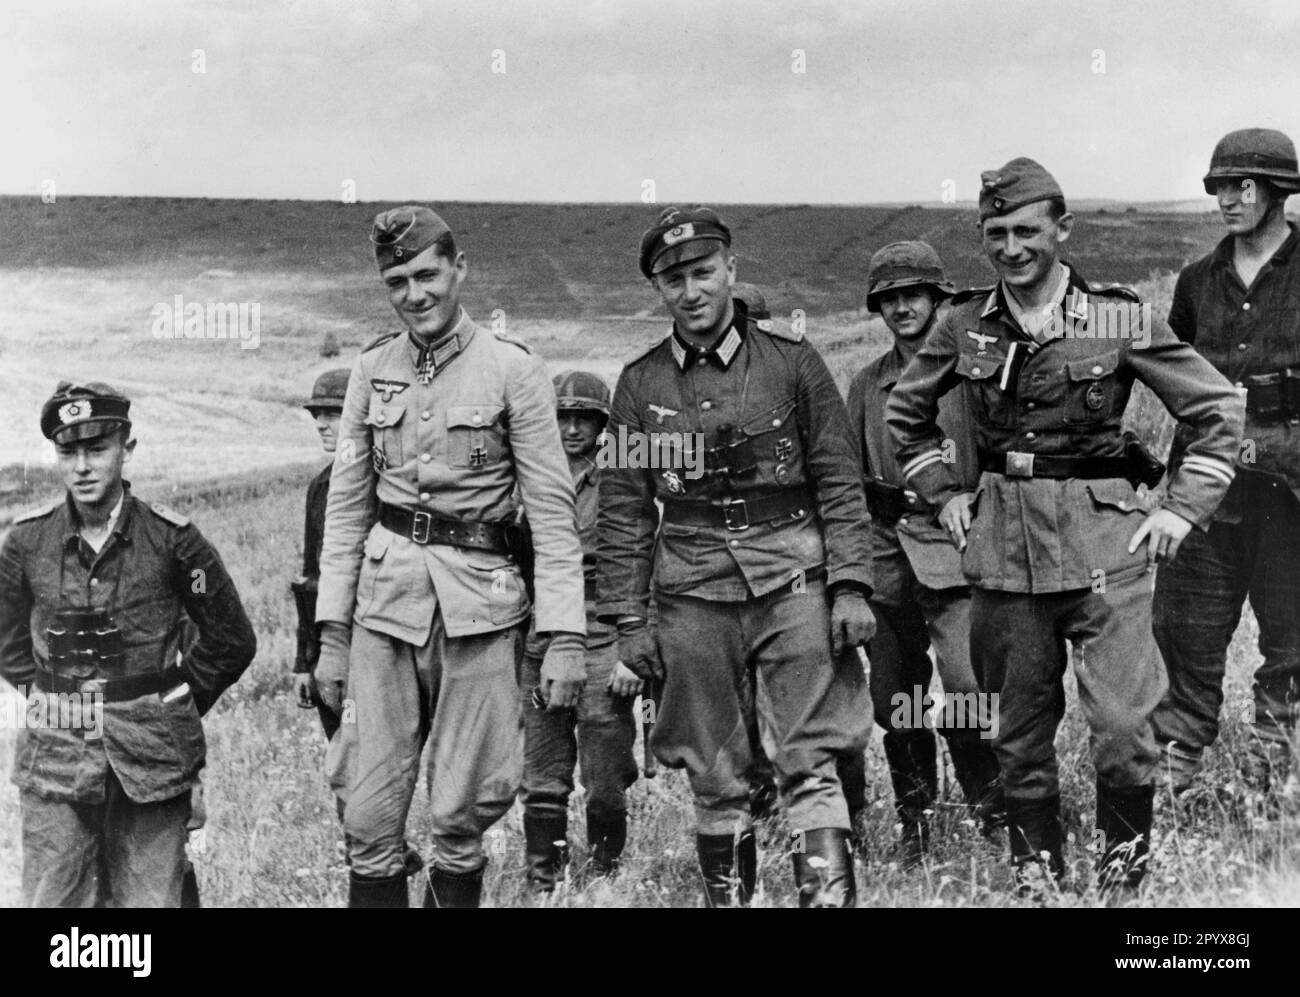 First Lieutenant and Chief of the 6th Company, Rifle Regiment 11, Hanns-Henning Eichert (in light uniform) with officers and soldiers after receiving the Knight's Cross while fighting in the central section of the Eastern Front (Soviets Stalin). Photo: Schnorr [automated translation] Stock Photo